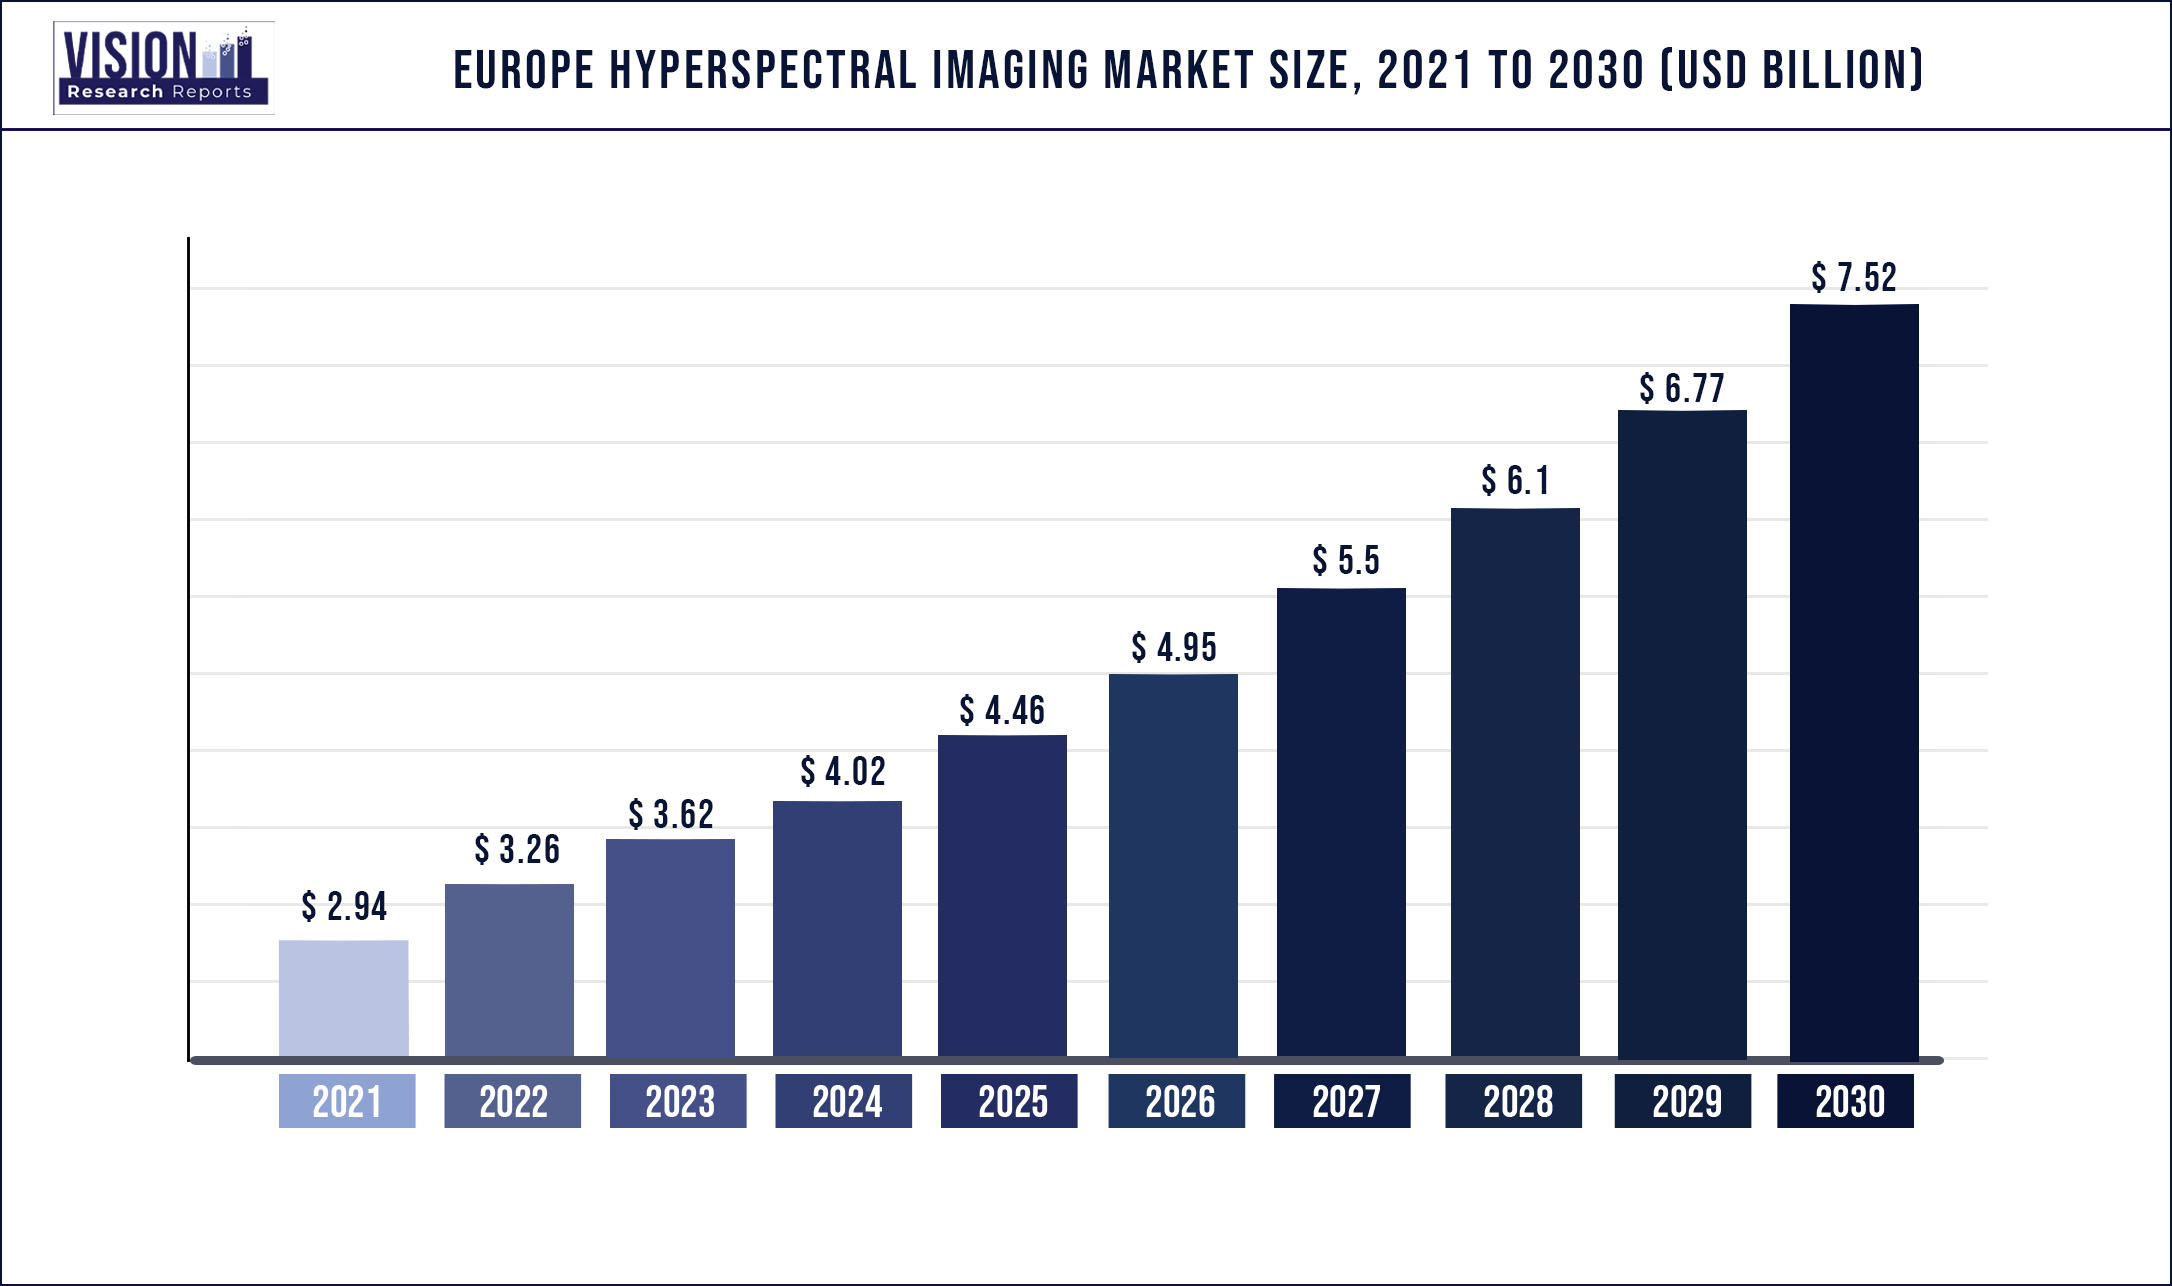 Europe Hyperspectral Imaging Market Size 2021 to 2030